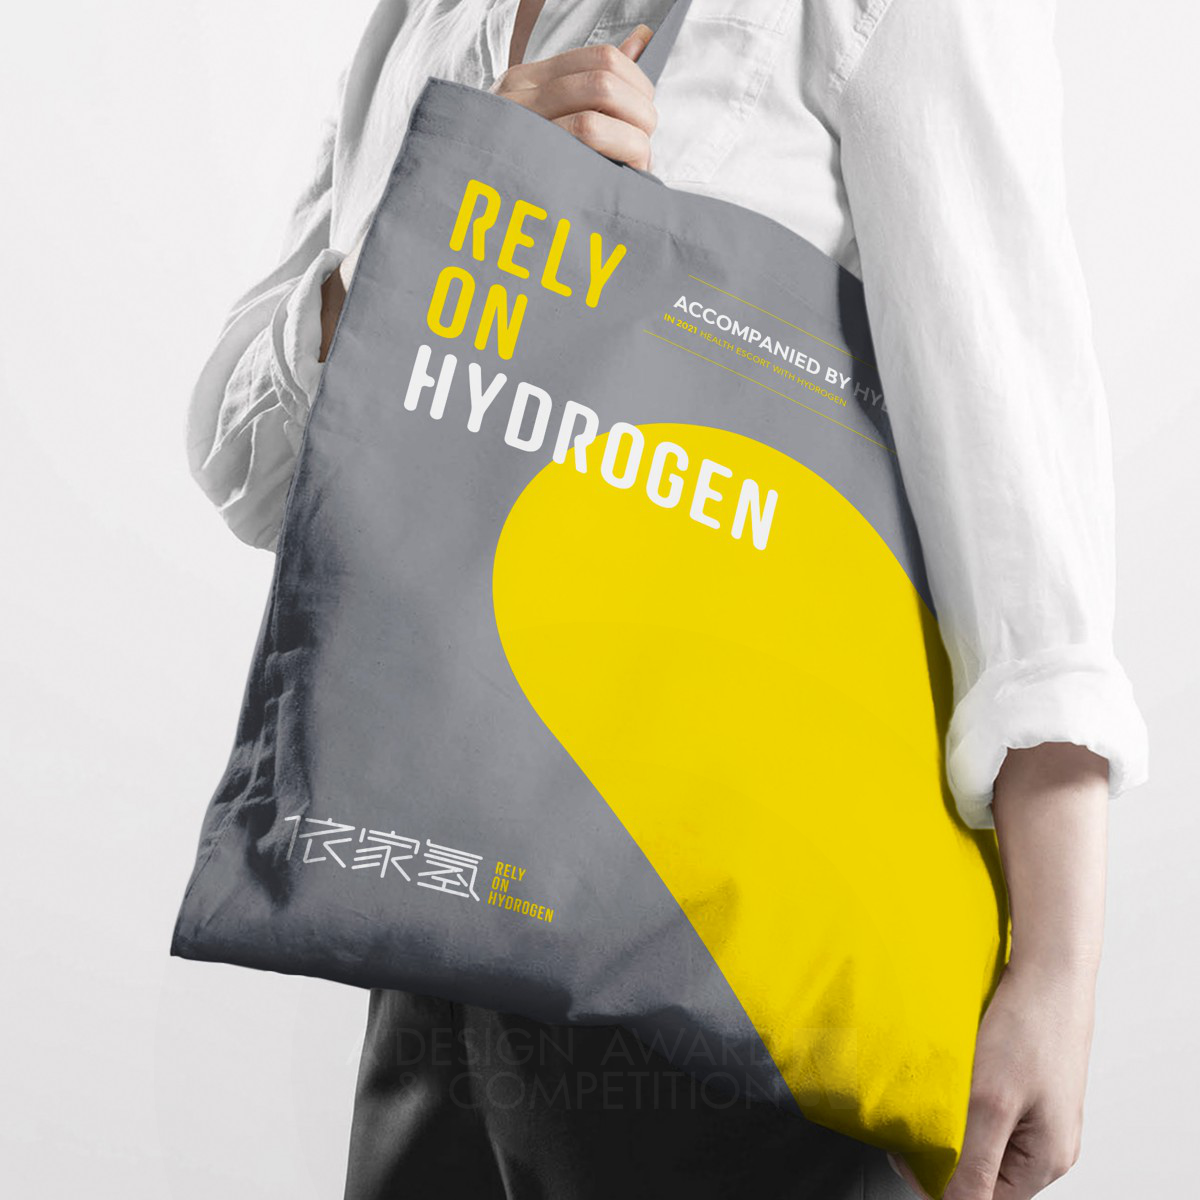 Revolutionary Corporate Identity Design for Rely on Hydrogen